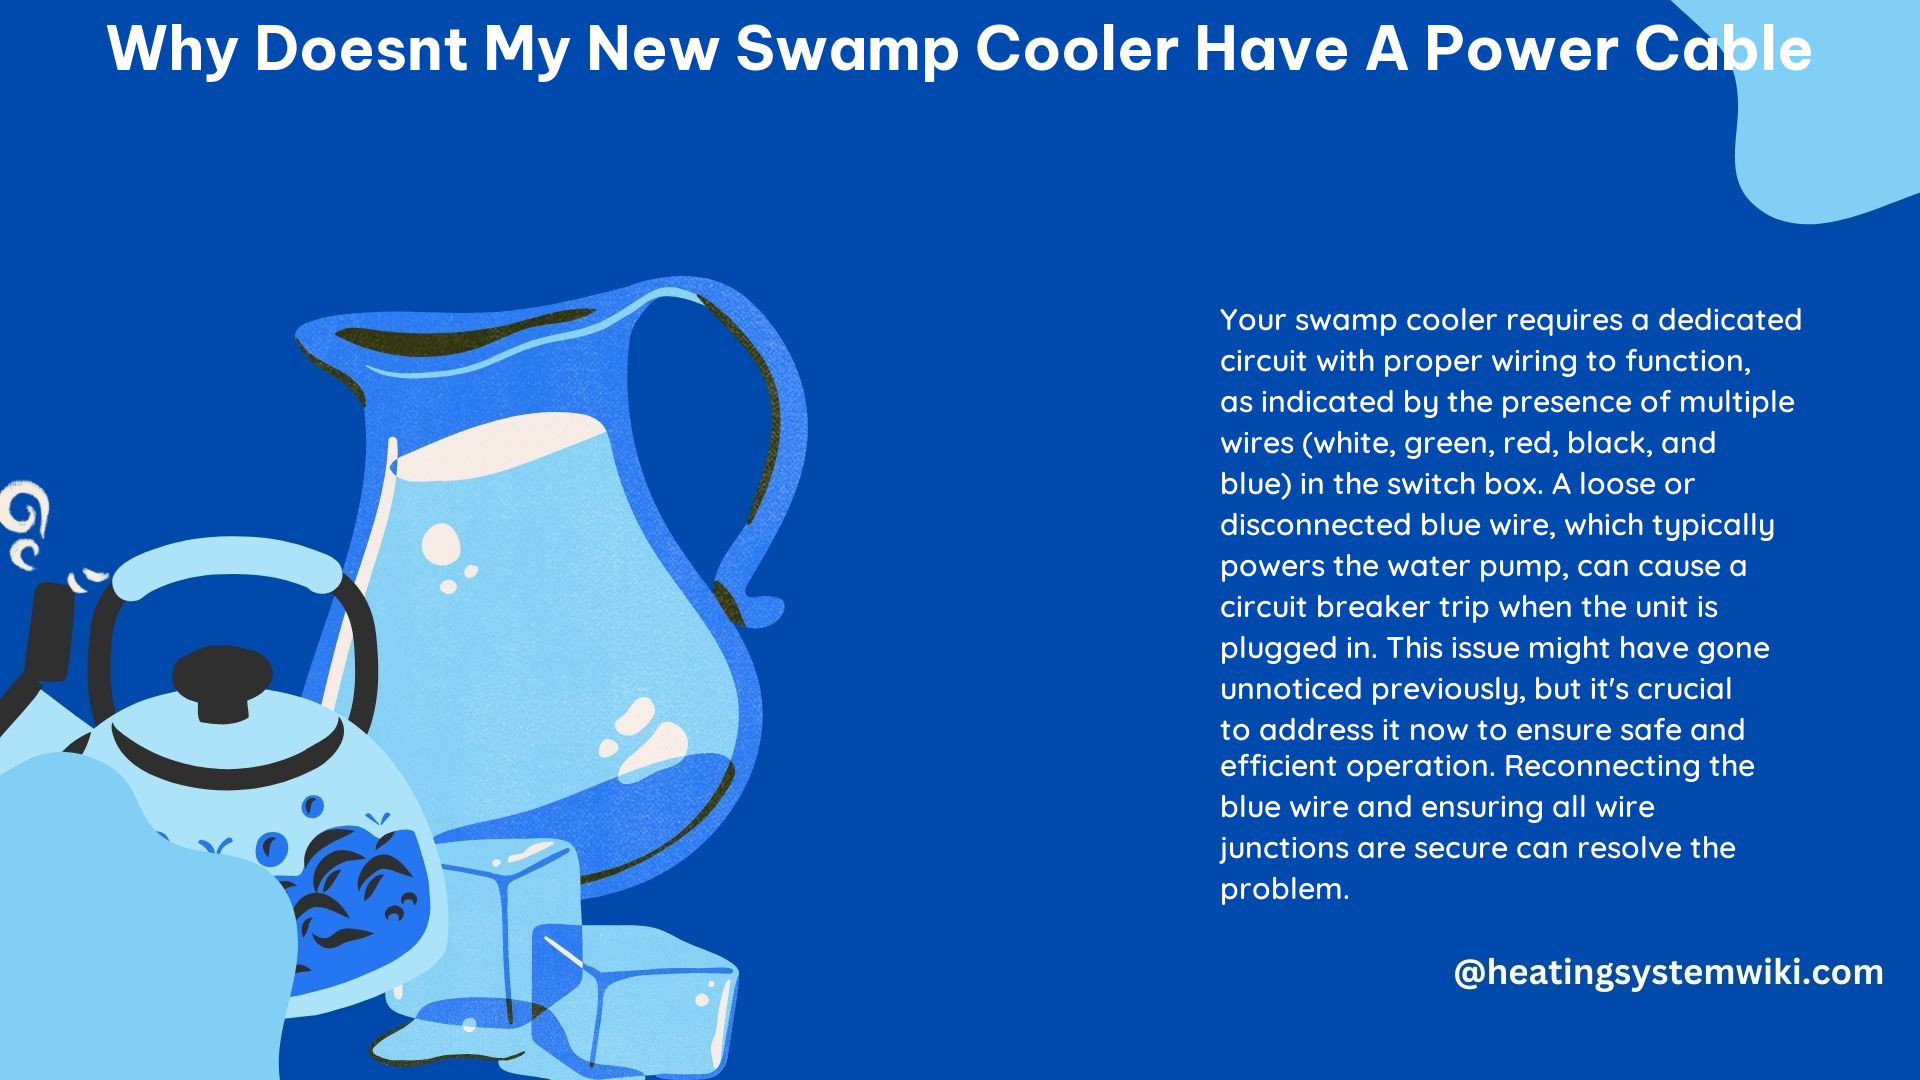 Why Doesnt My New Swamp Cooler Have a Power Cable